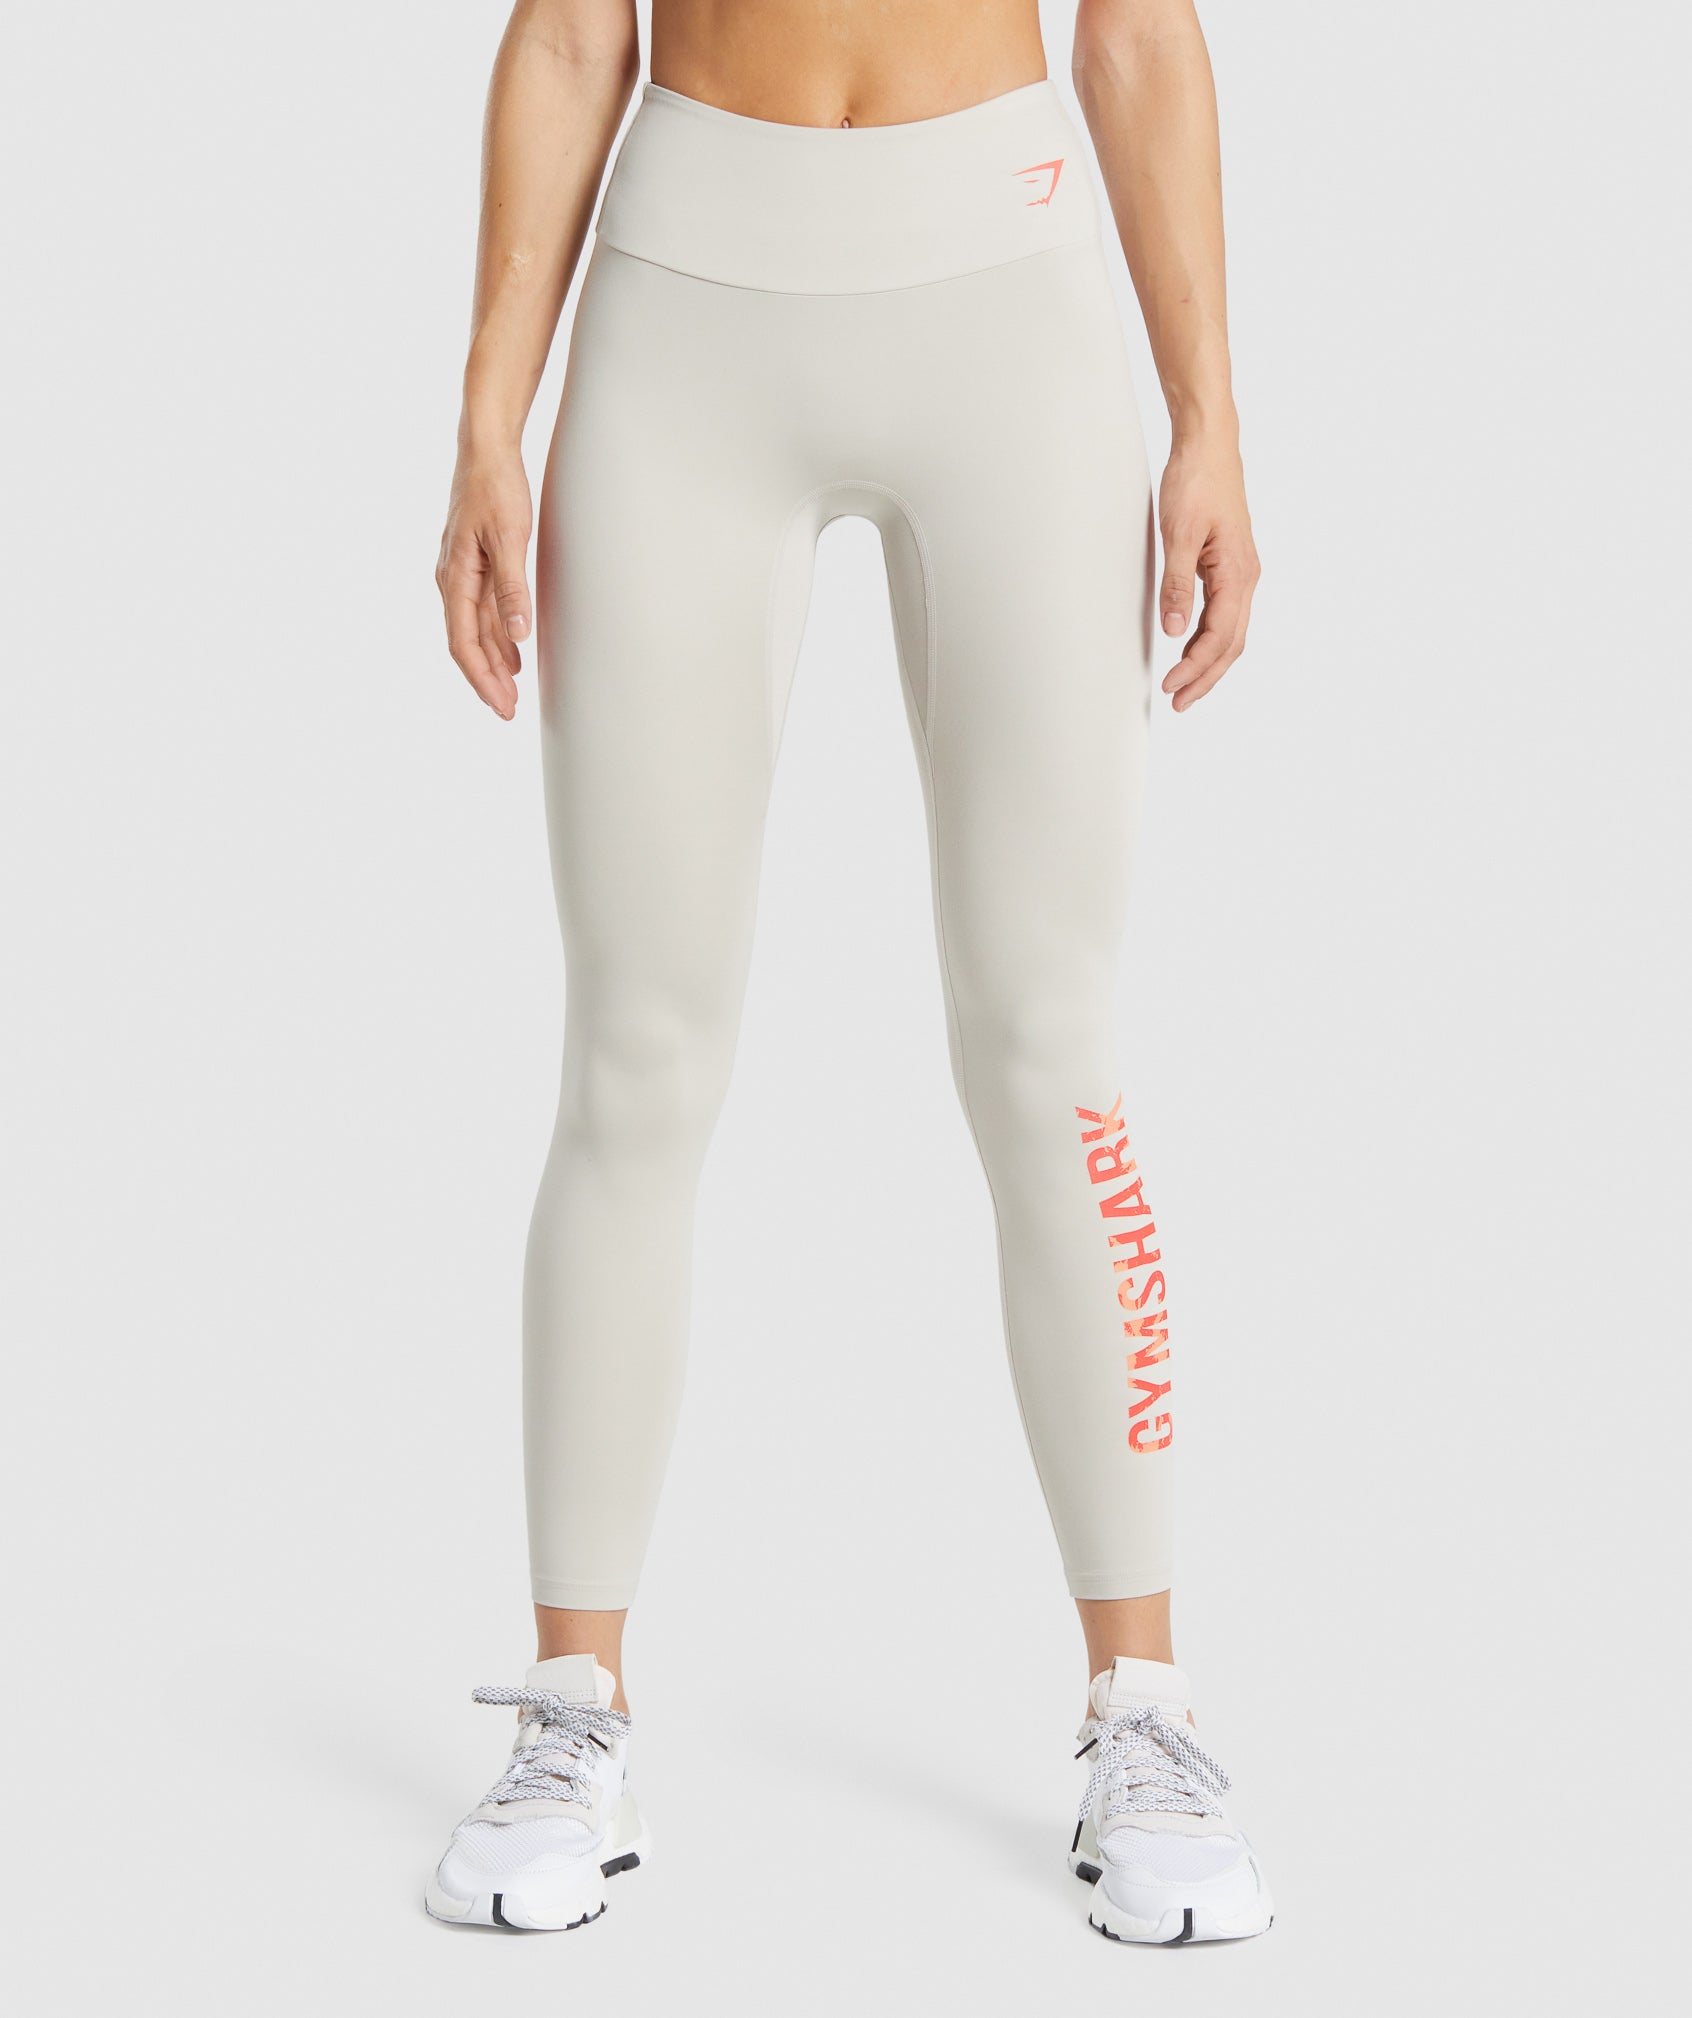 Gymshark Speed High Waisted Graphic Leggings - ShopStyle